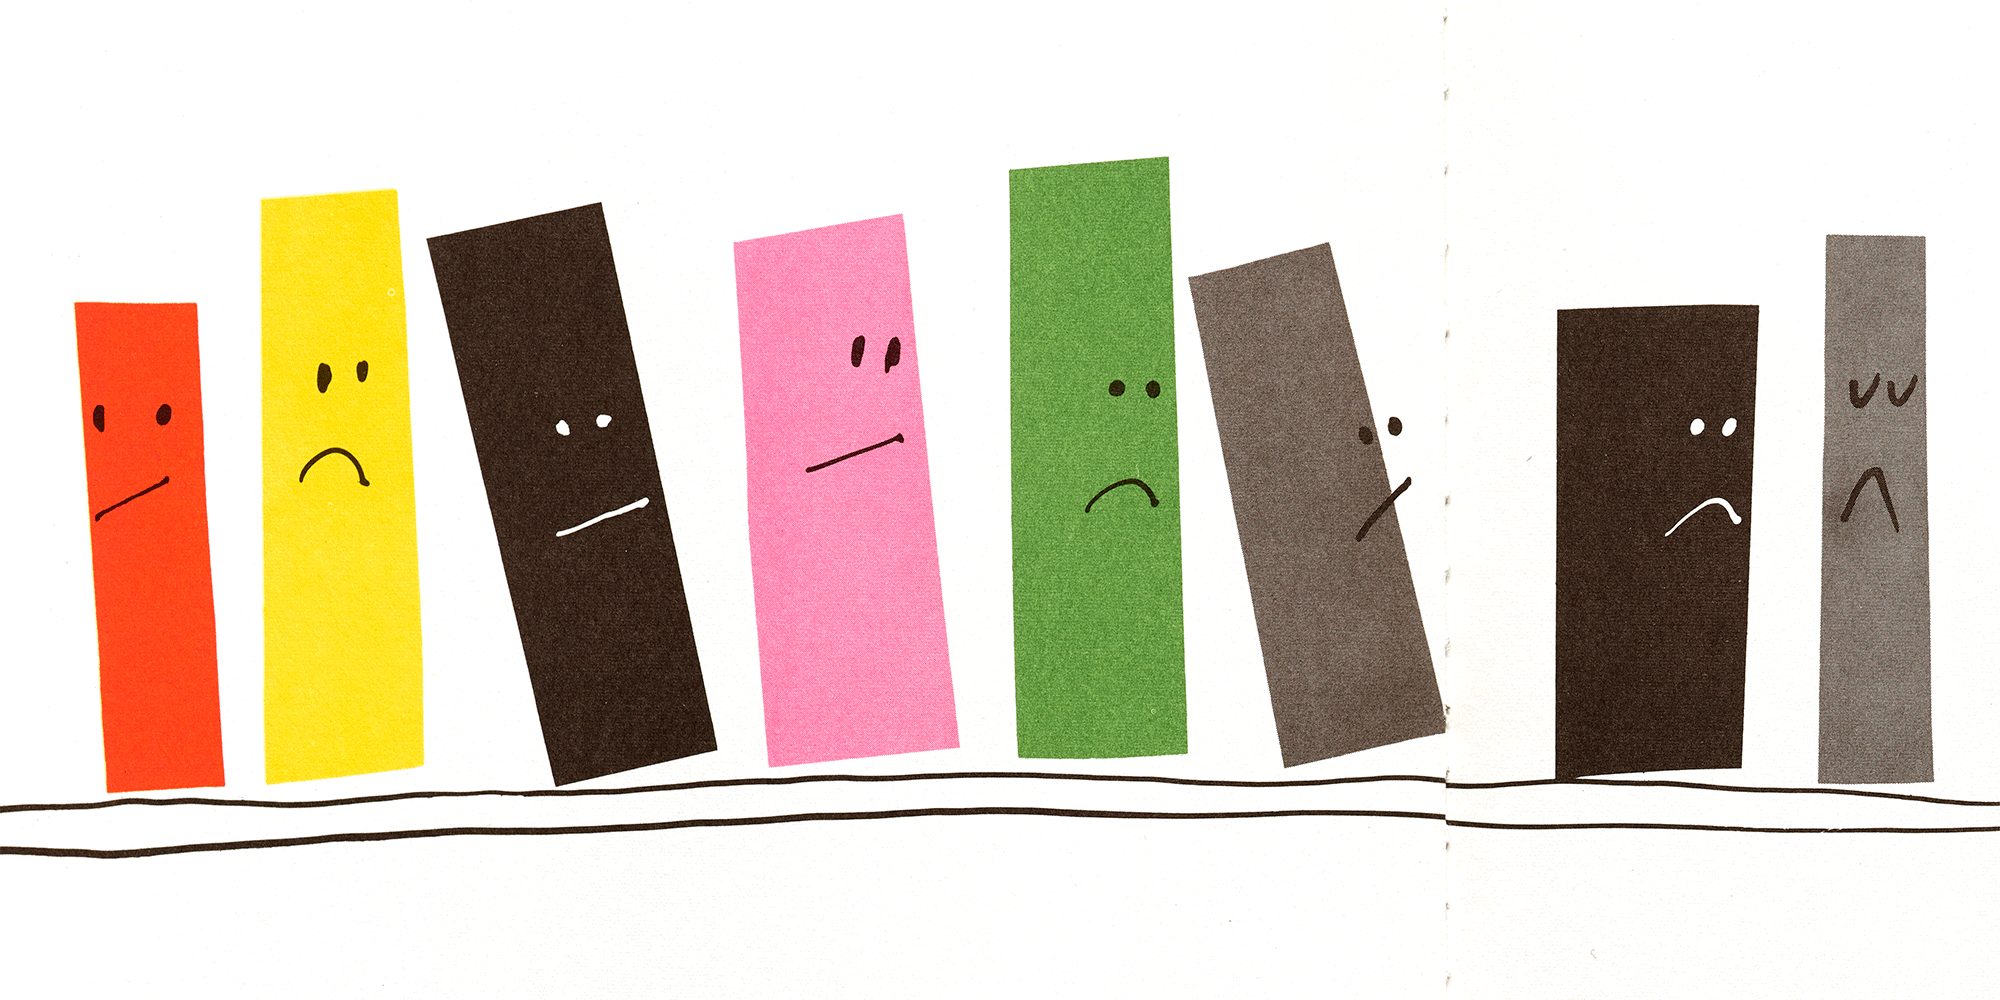 Paul Rand bookshelf illustration as an animation with frowns turning upside down